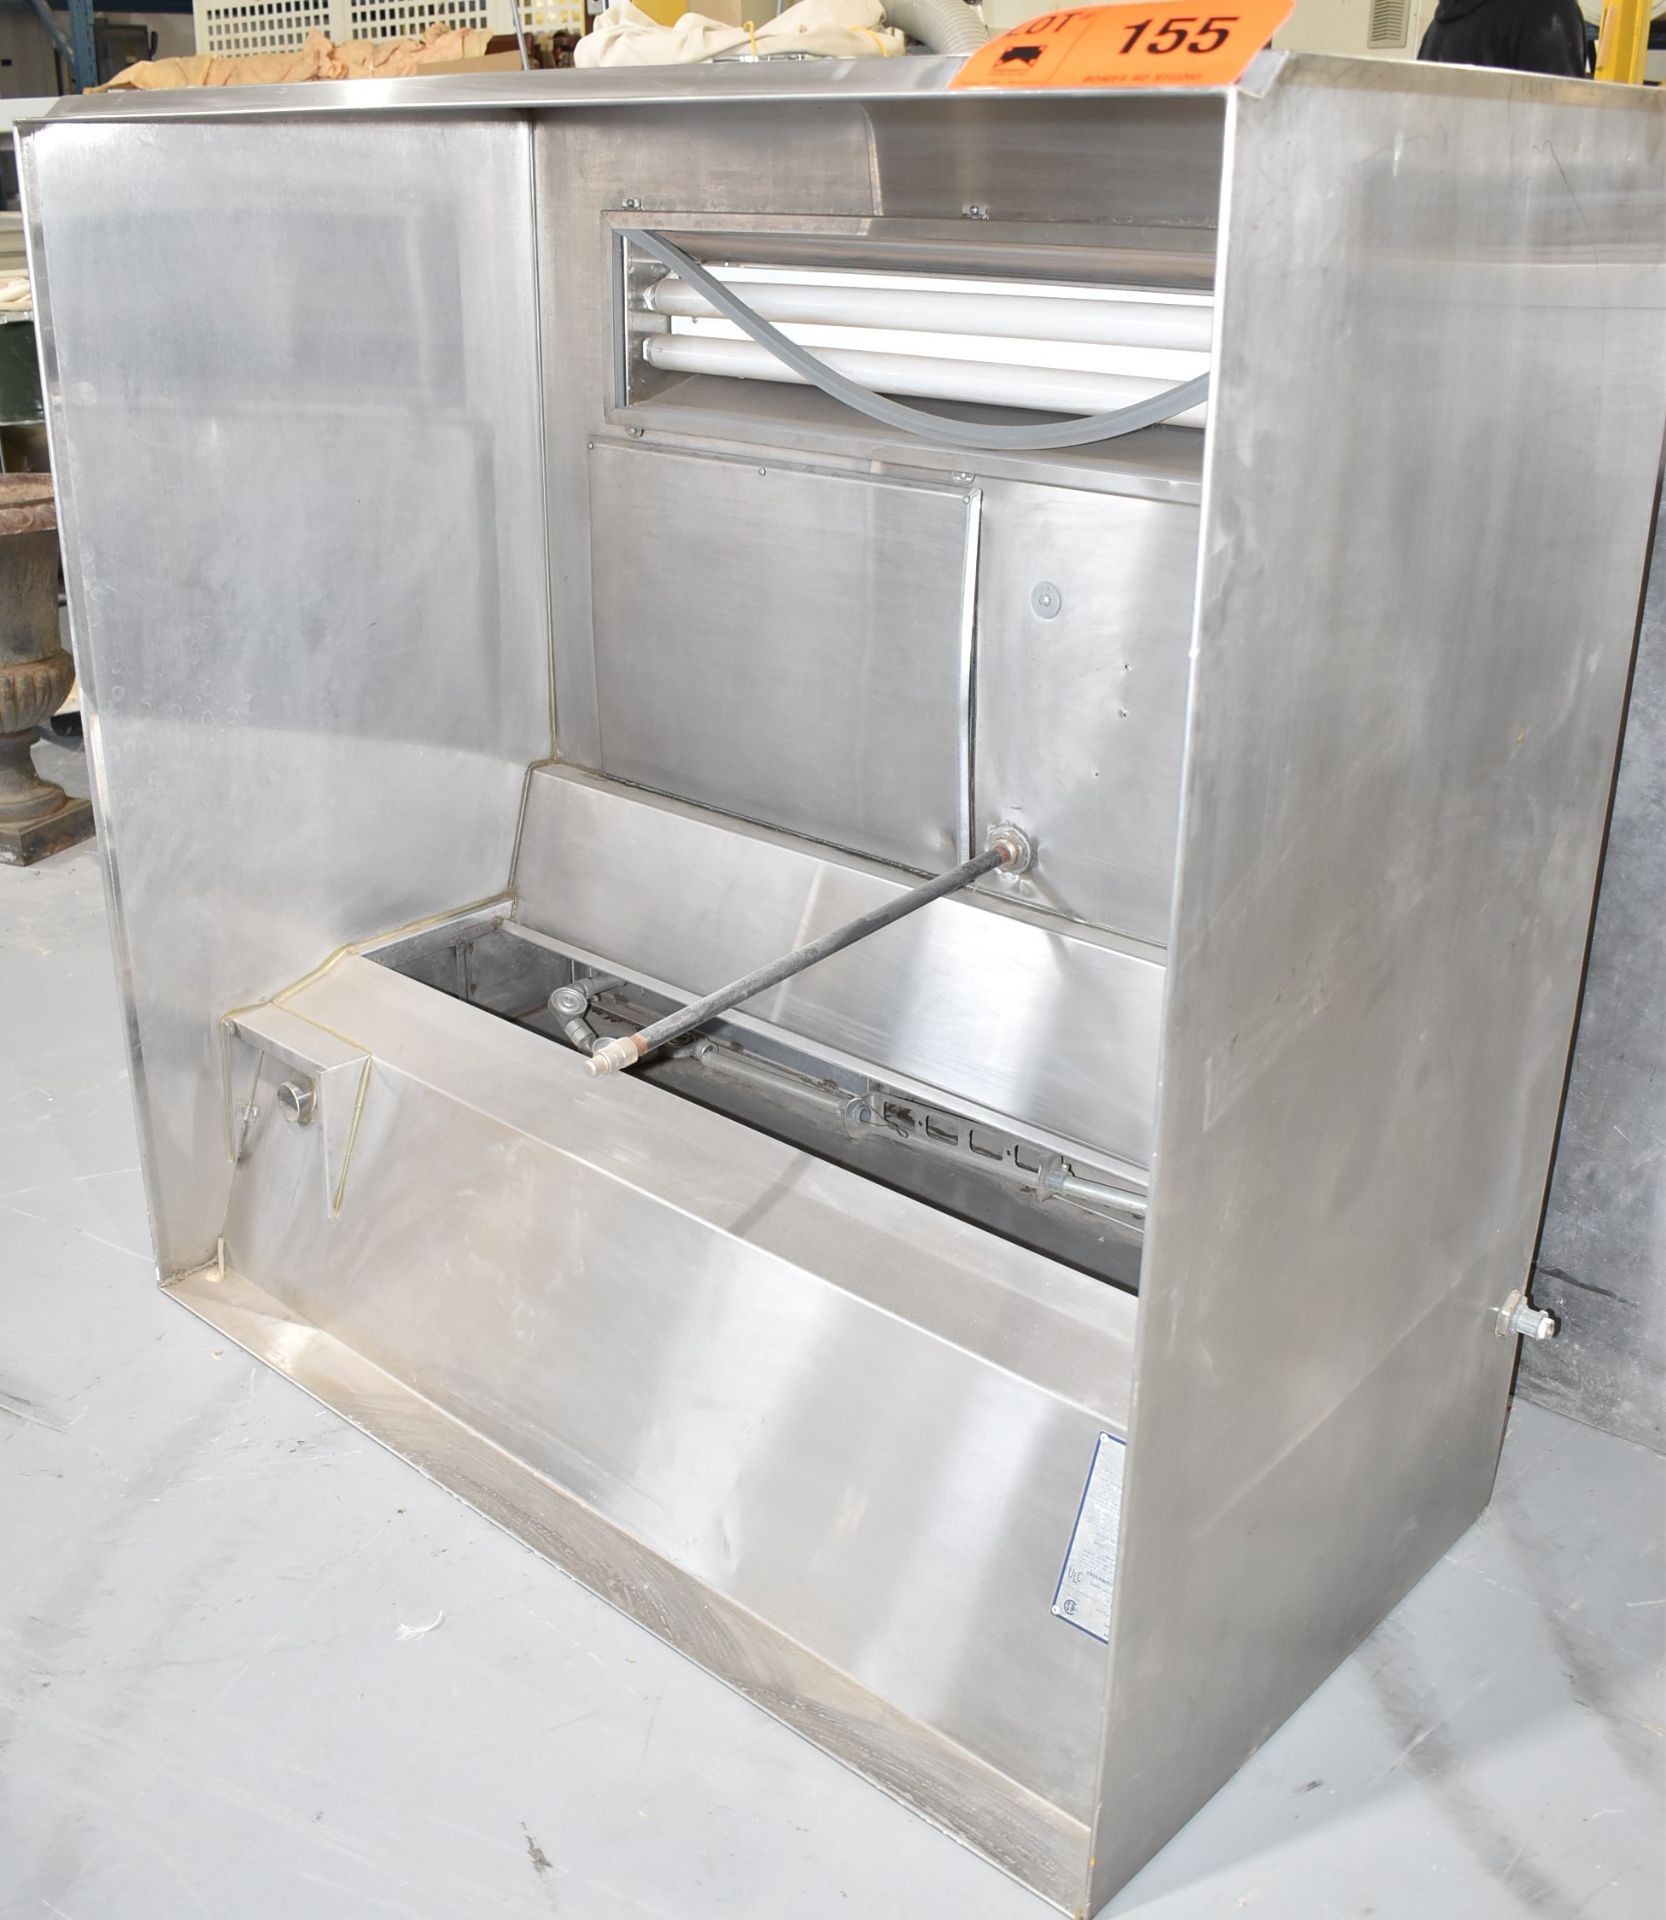 GAYLORD VENTILATOR G BDL 48" COMMERCIAL KITCHEN EXHAUST HOOD, S/N 167 [RIGGING FEES FOR LOT #